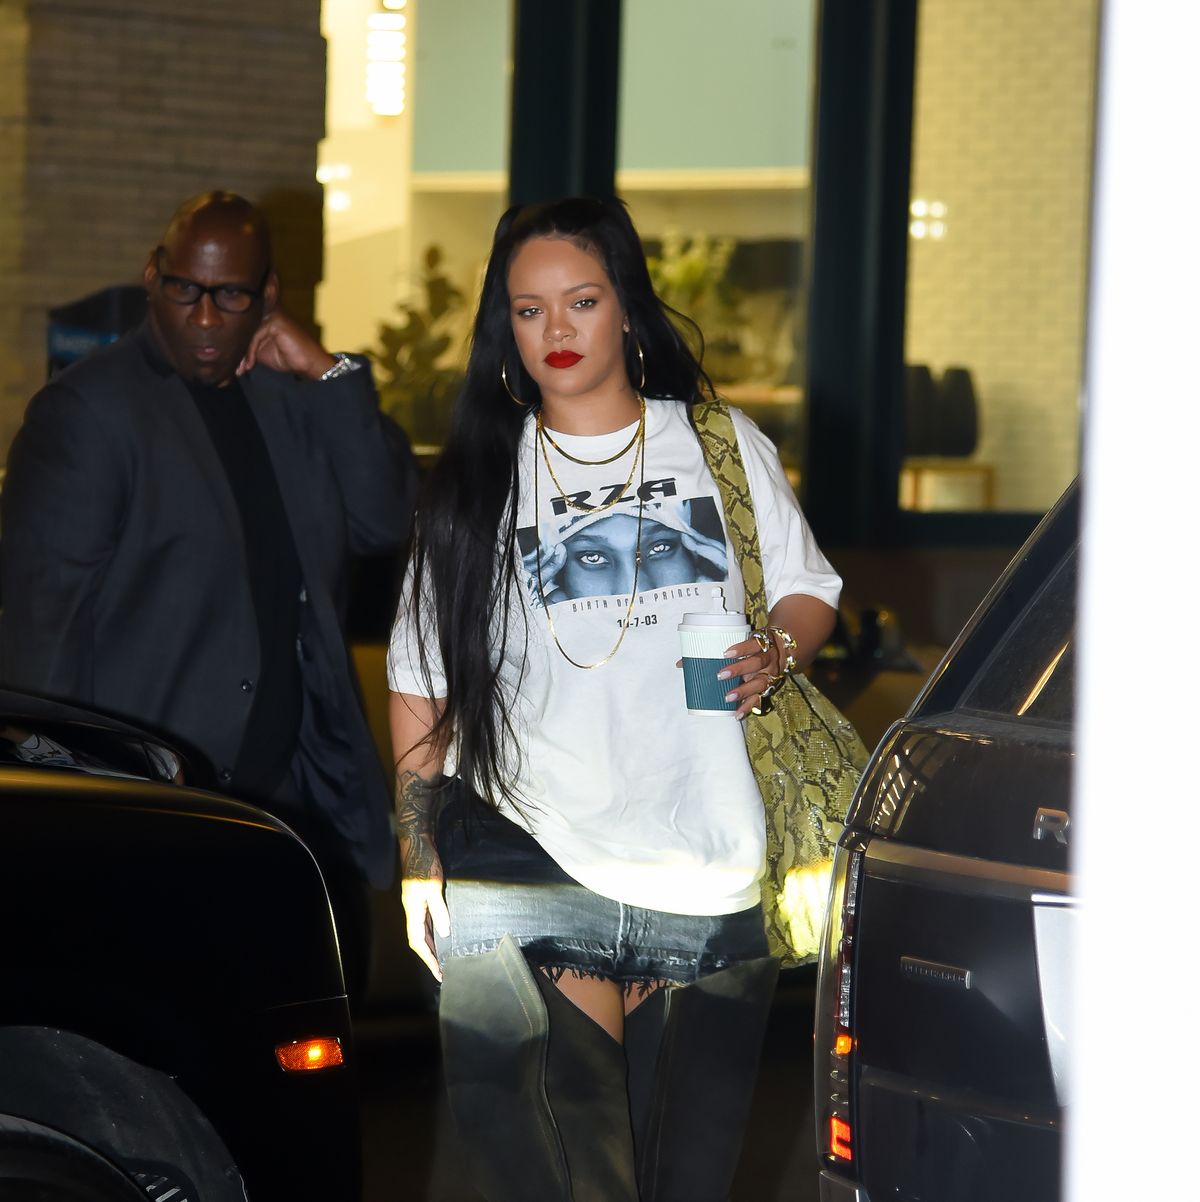 Rihanna's giant boots were made for stomping